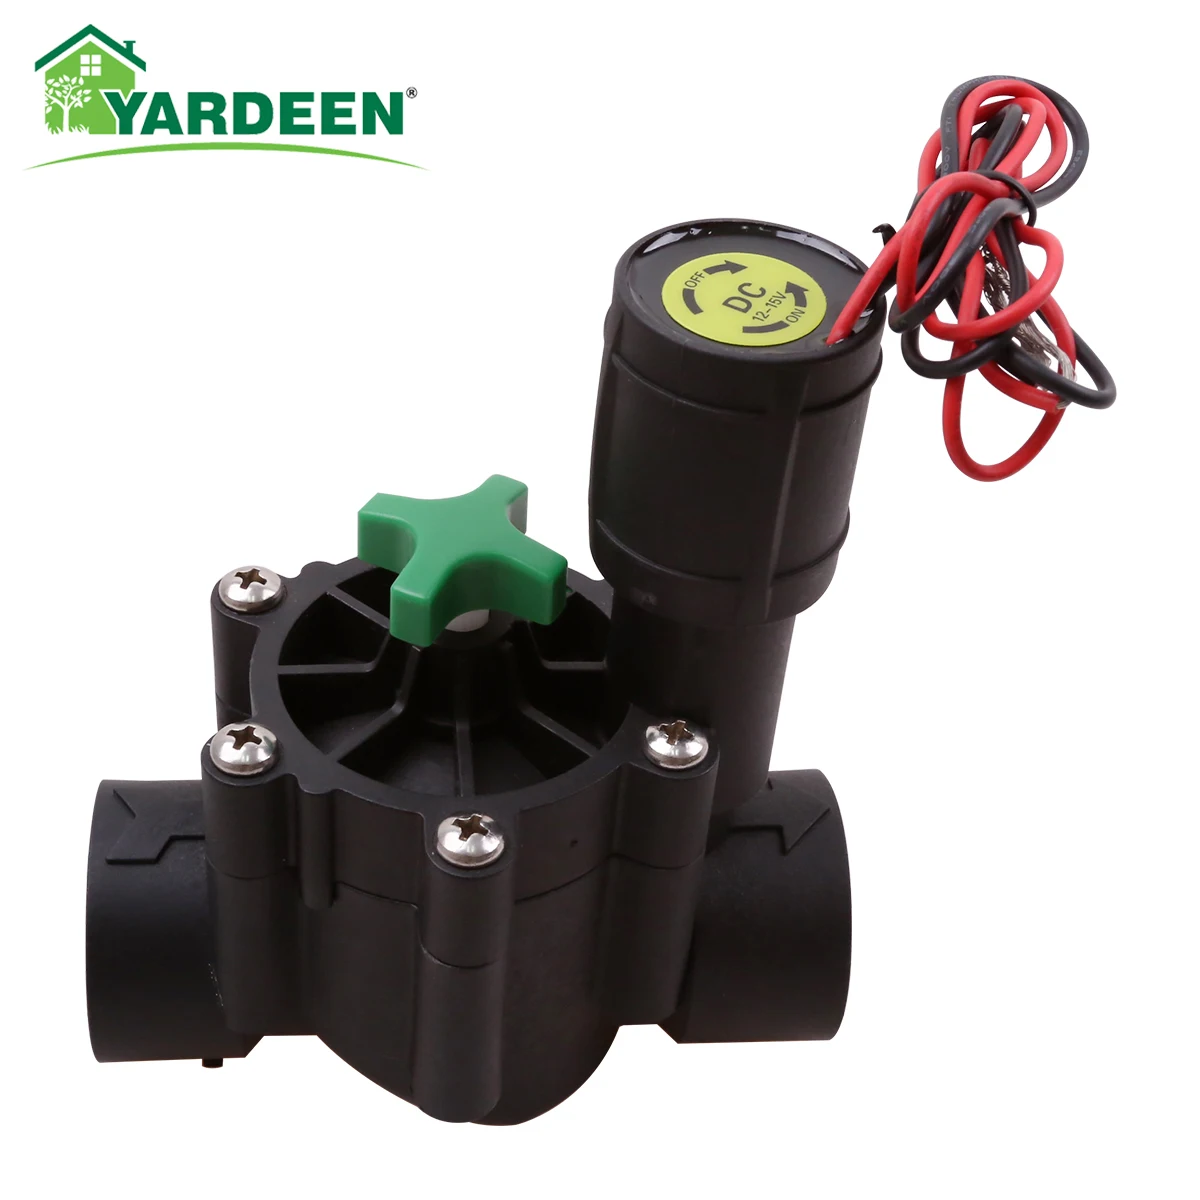 New Arrival Industrial Irrigation Valve Can Suitable for DC 1"2"3" Size 12V 、AC 3/4'' or 1'' Garden System Controller